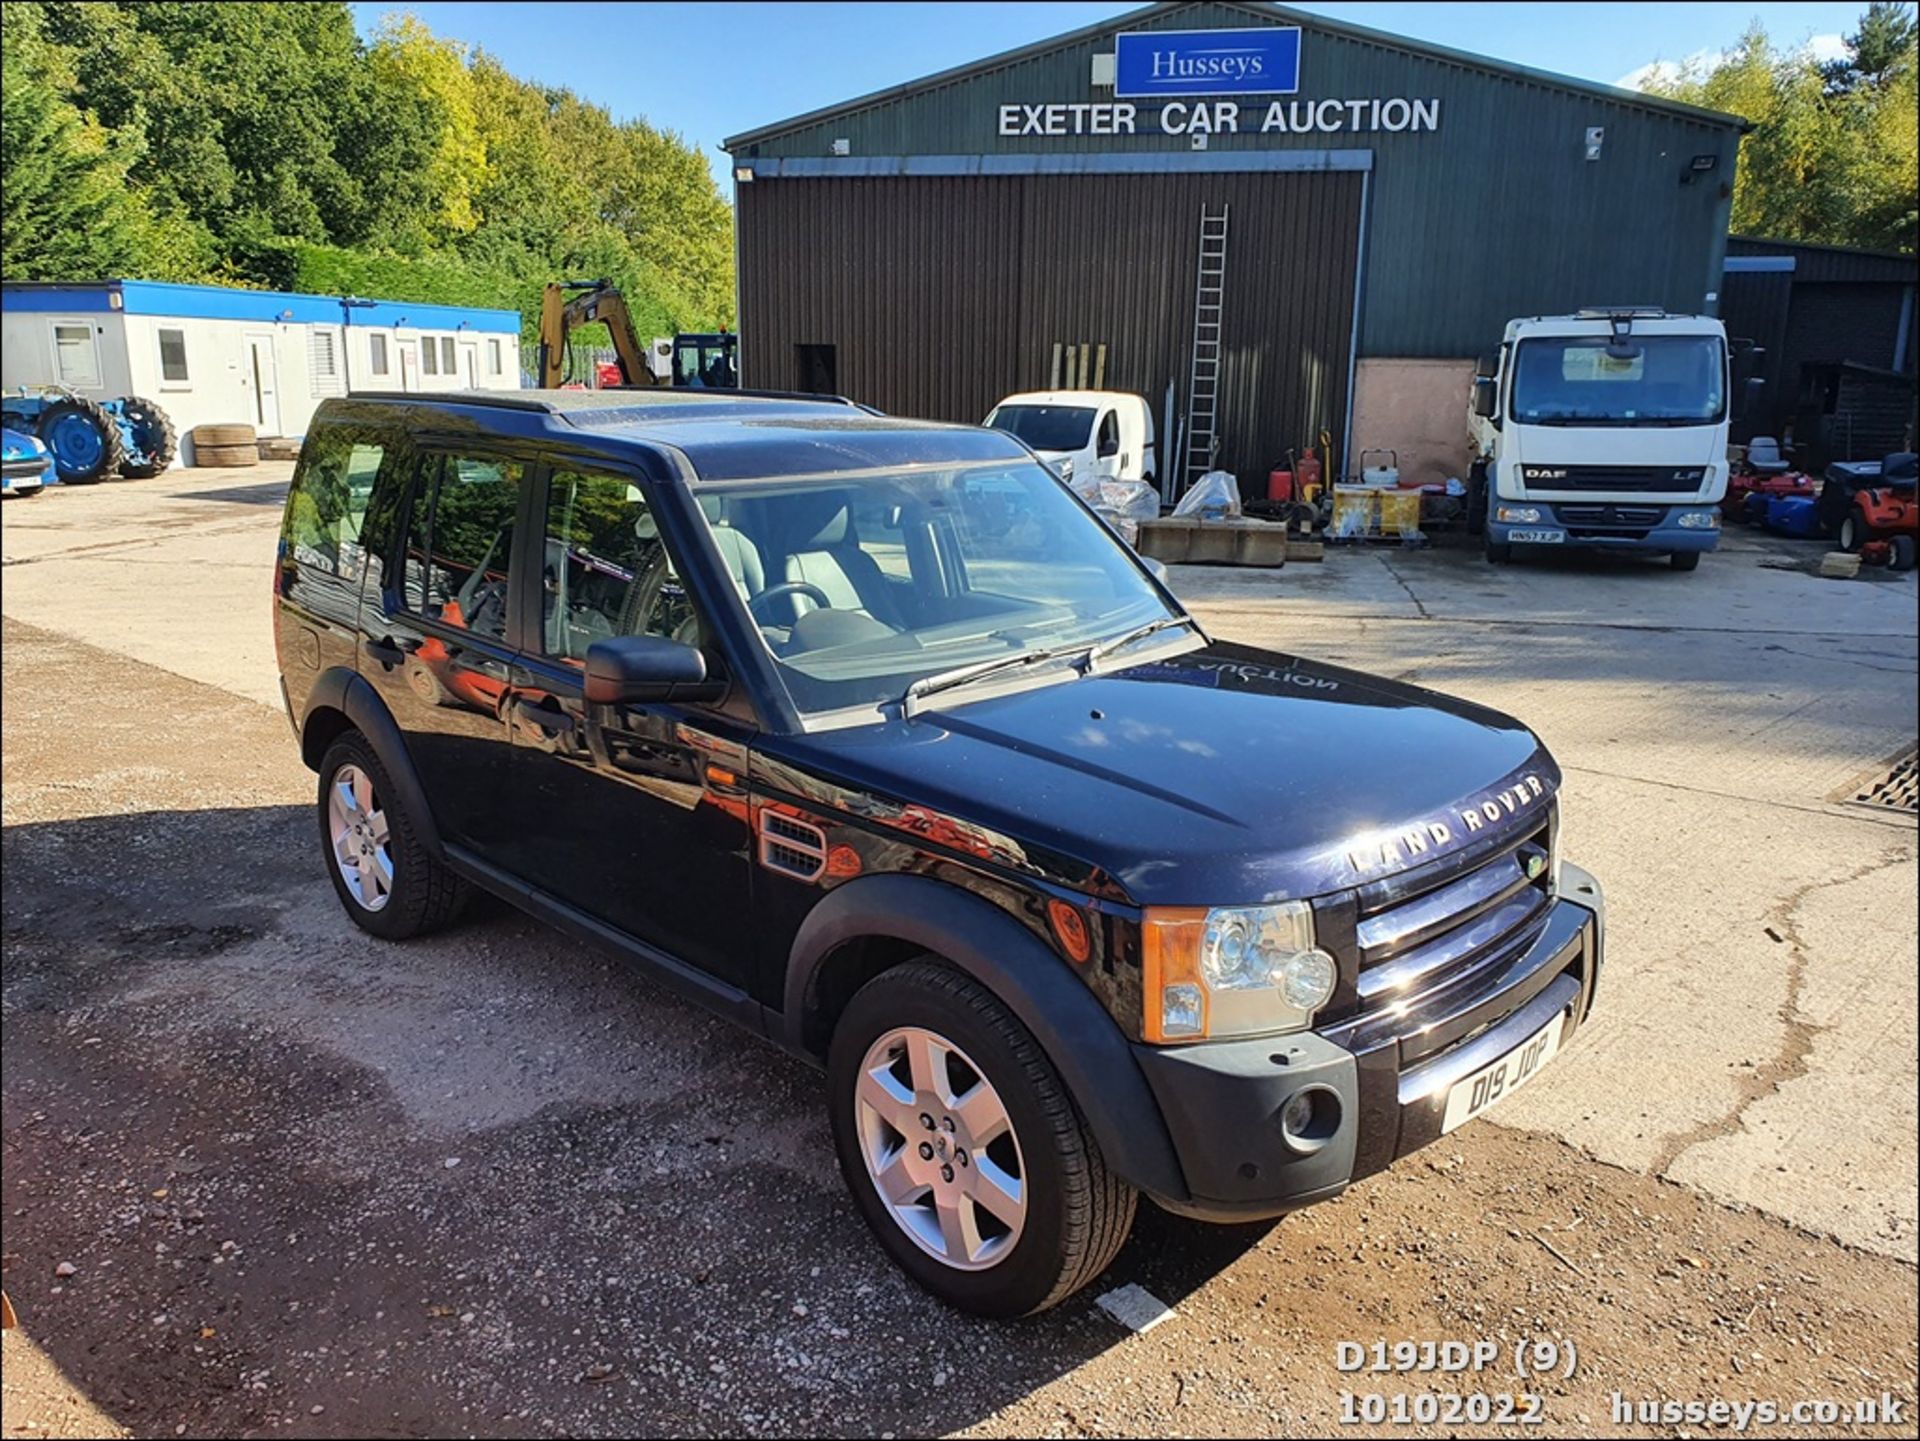 2008 LAND ROVER DISCOVERY TDV6 HSE A - 2720cc 5dr Estate (Blue, 164k) - Image 10 of 36